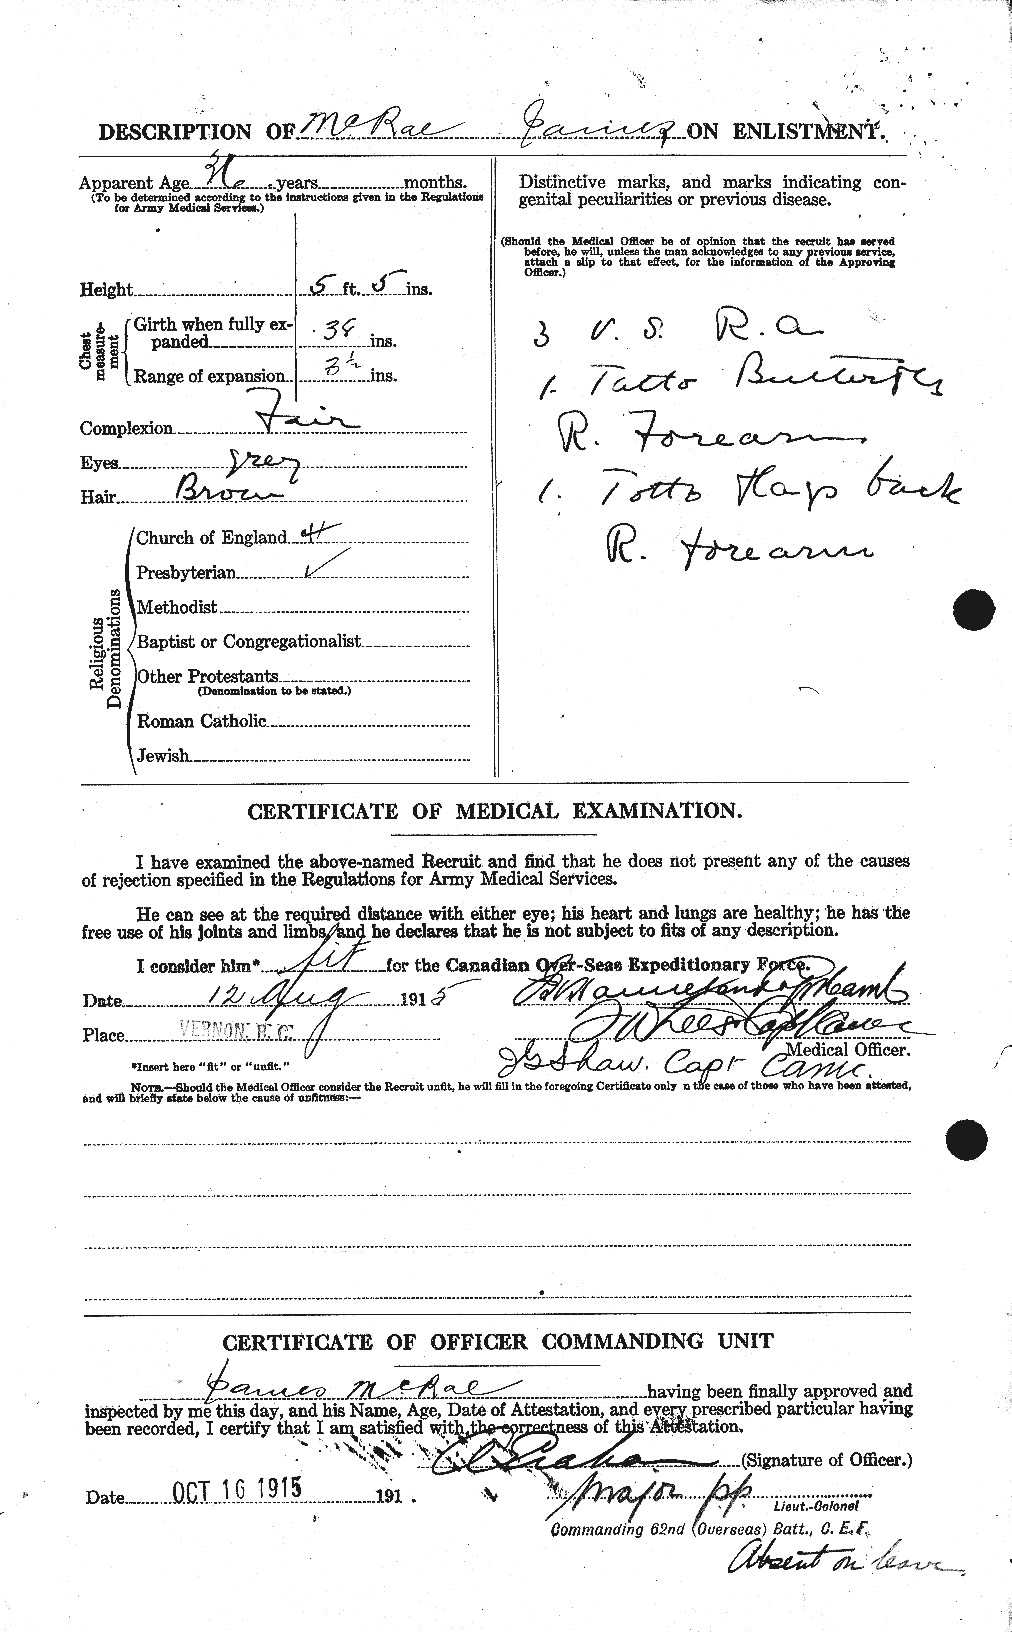 Personnel Records of the First World War - CEF 542775b